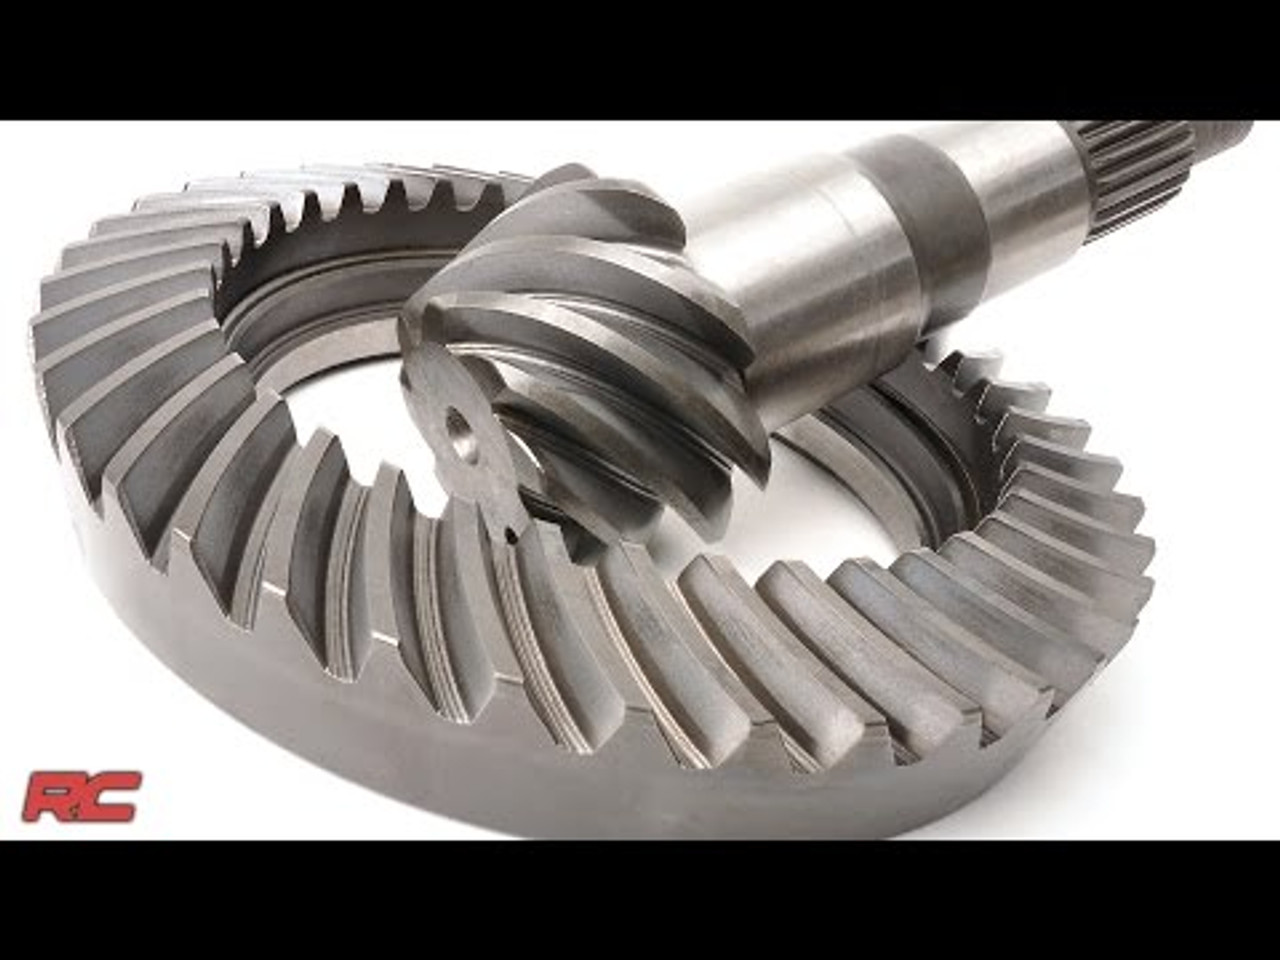 Dana 44 Ring and Pinion Set - 5.13 Ratio (Jeep TJ - Rear Axle) Rough Country